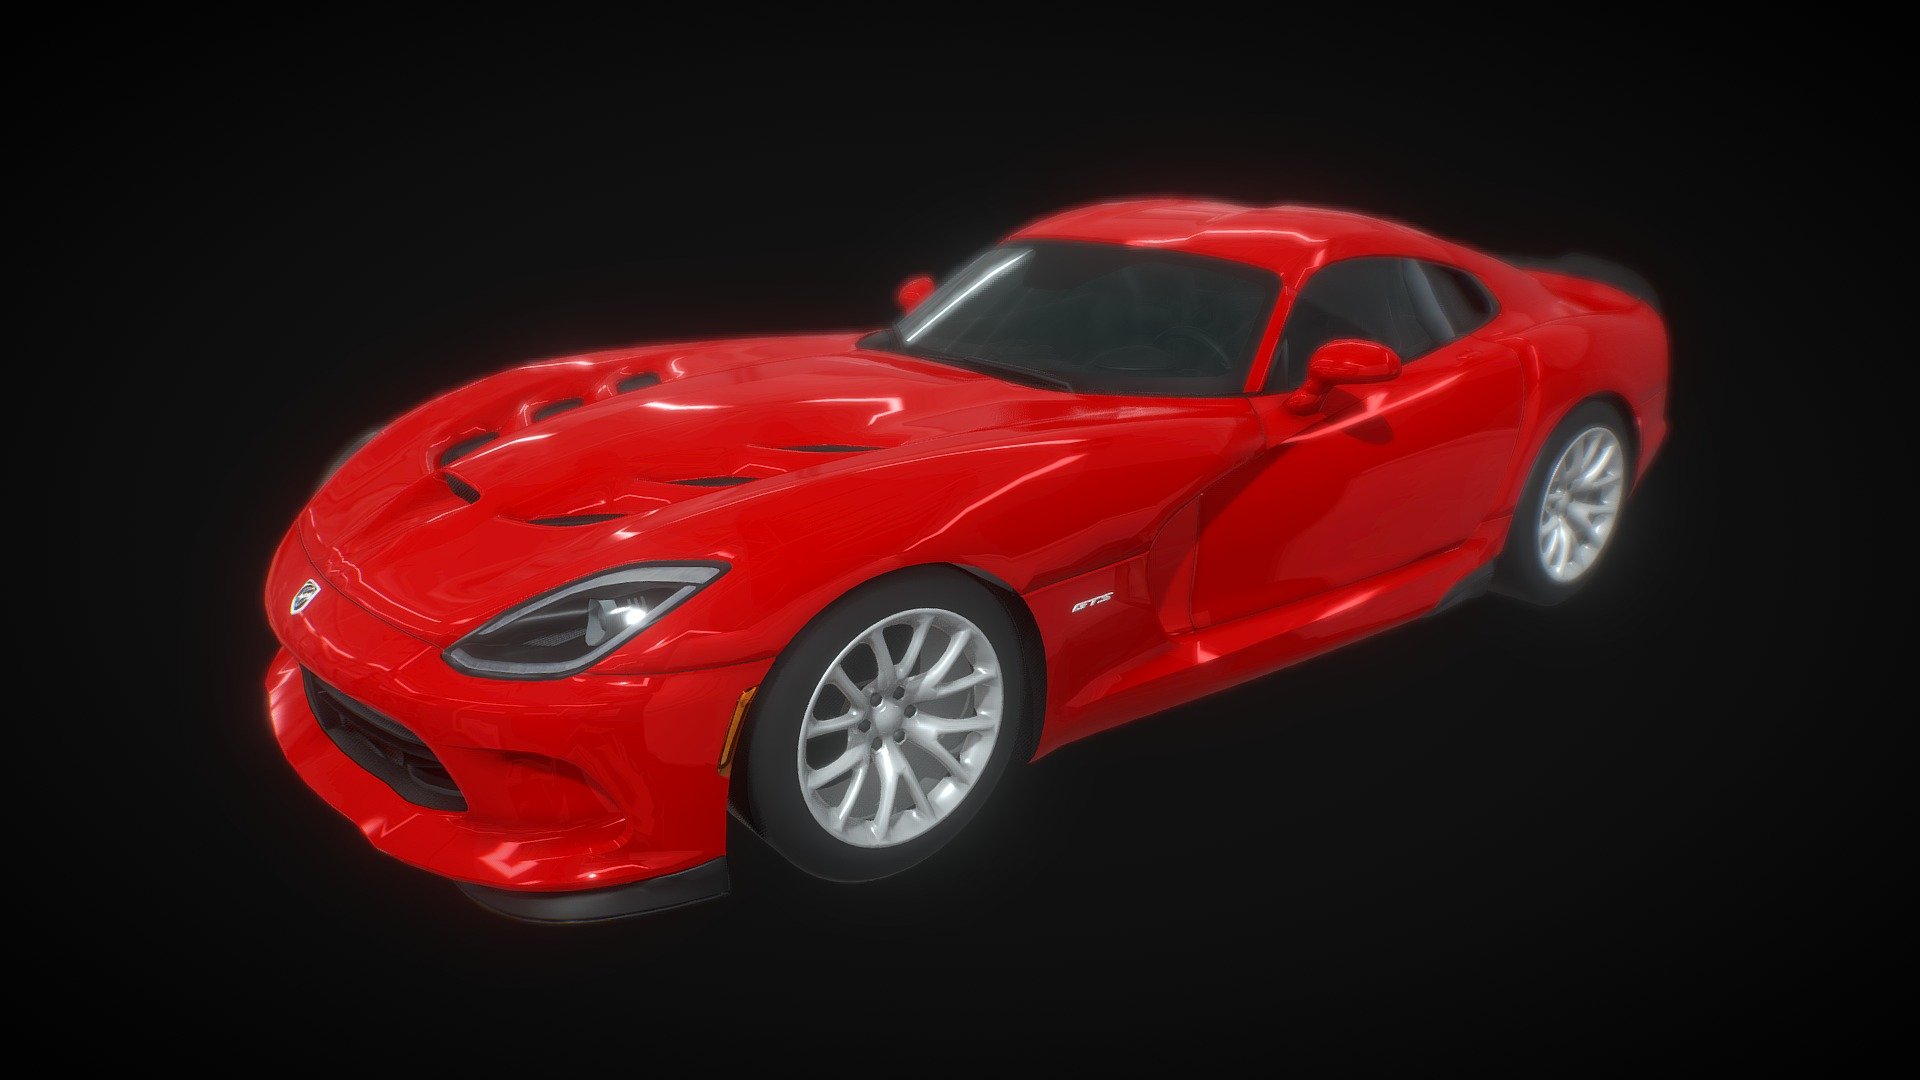 The Dodge Viper is a sports car that was manufactured by Dodge (by SRT for 2013 and 2014), a division of American car manufacturer FCA US LLC from 1992 until 2017, having taken a brief hiatus in 2007 and from 2010 to 2012. Production of the two-seat super car began at New Mack Assembly Plant in 1991 and moved to Conner Avenue Assembly Plant in October 1995.


Source: Wikipedia

low poly game ready unreal engine and unity engine ready.

perfect for game developers 3d model